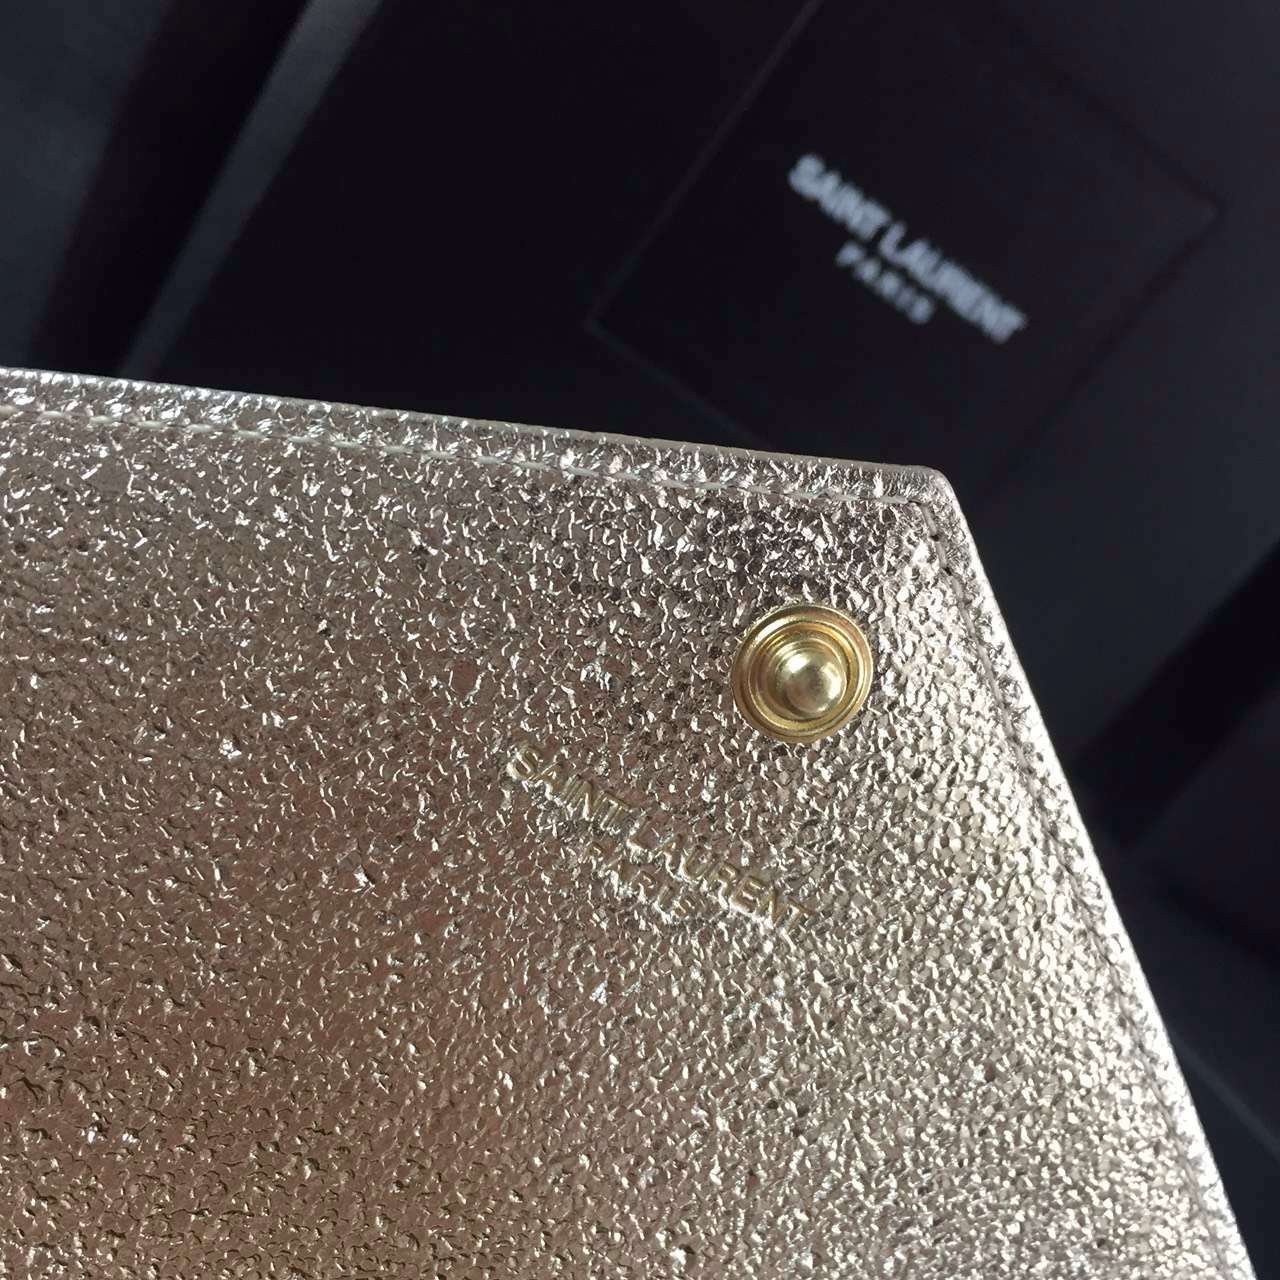 2016 Cheap YSL Out Sale with Free Shipping-Saint Laurent Monogram Envelope Chain Wallet in Pale Gold Grained Matelasse Metallic Leather - Click Image to Close